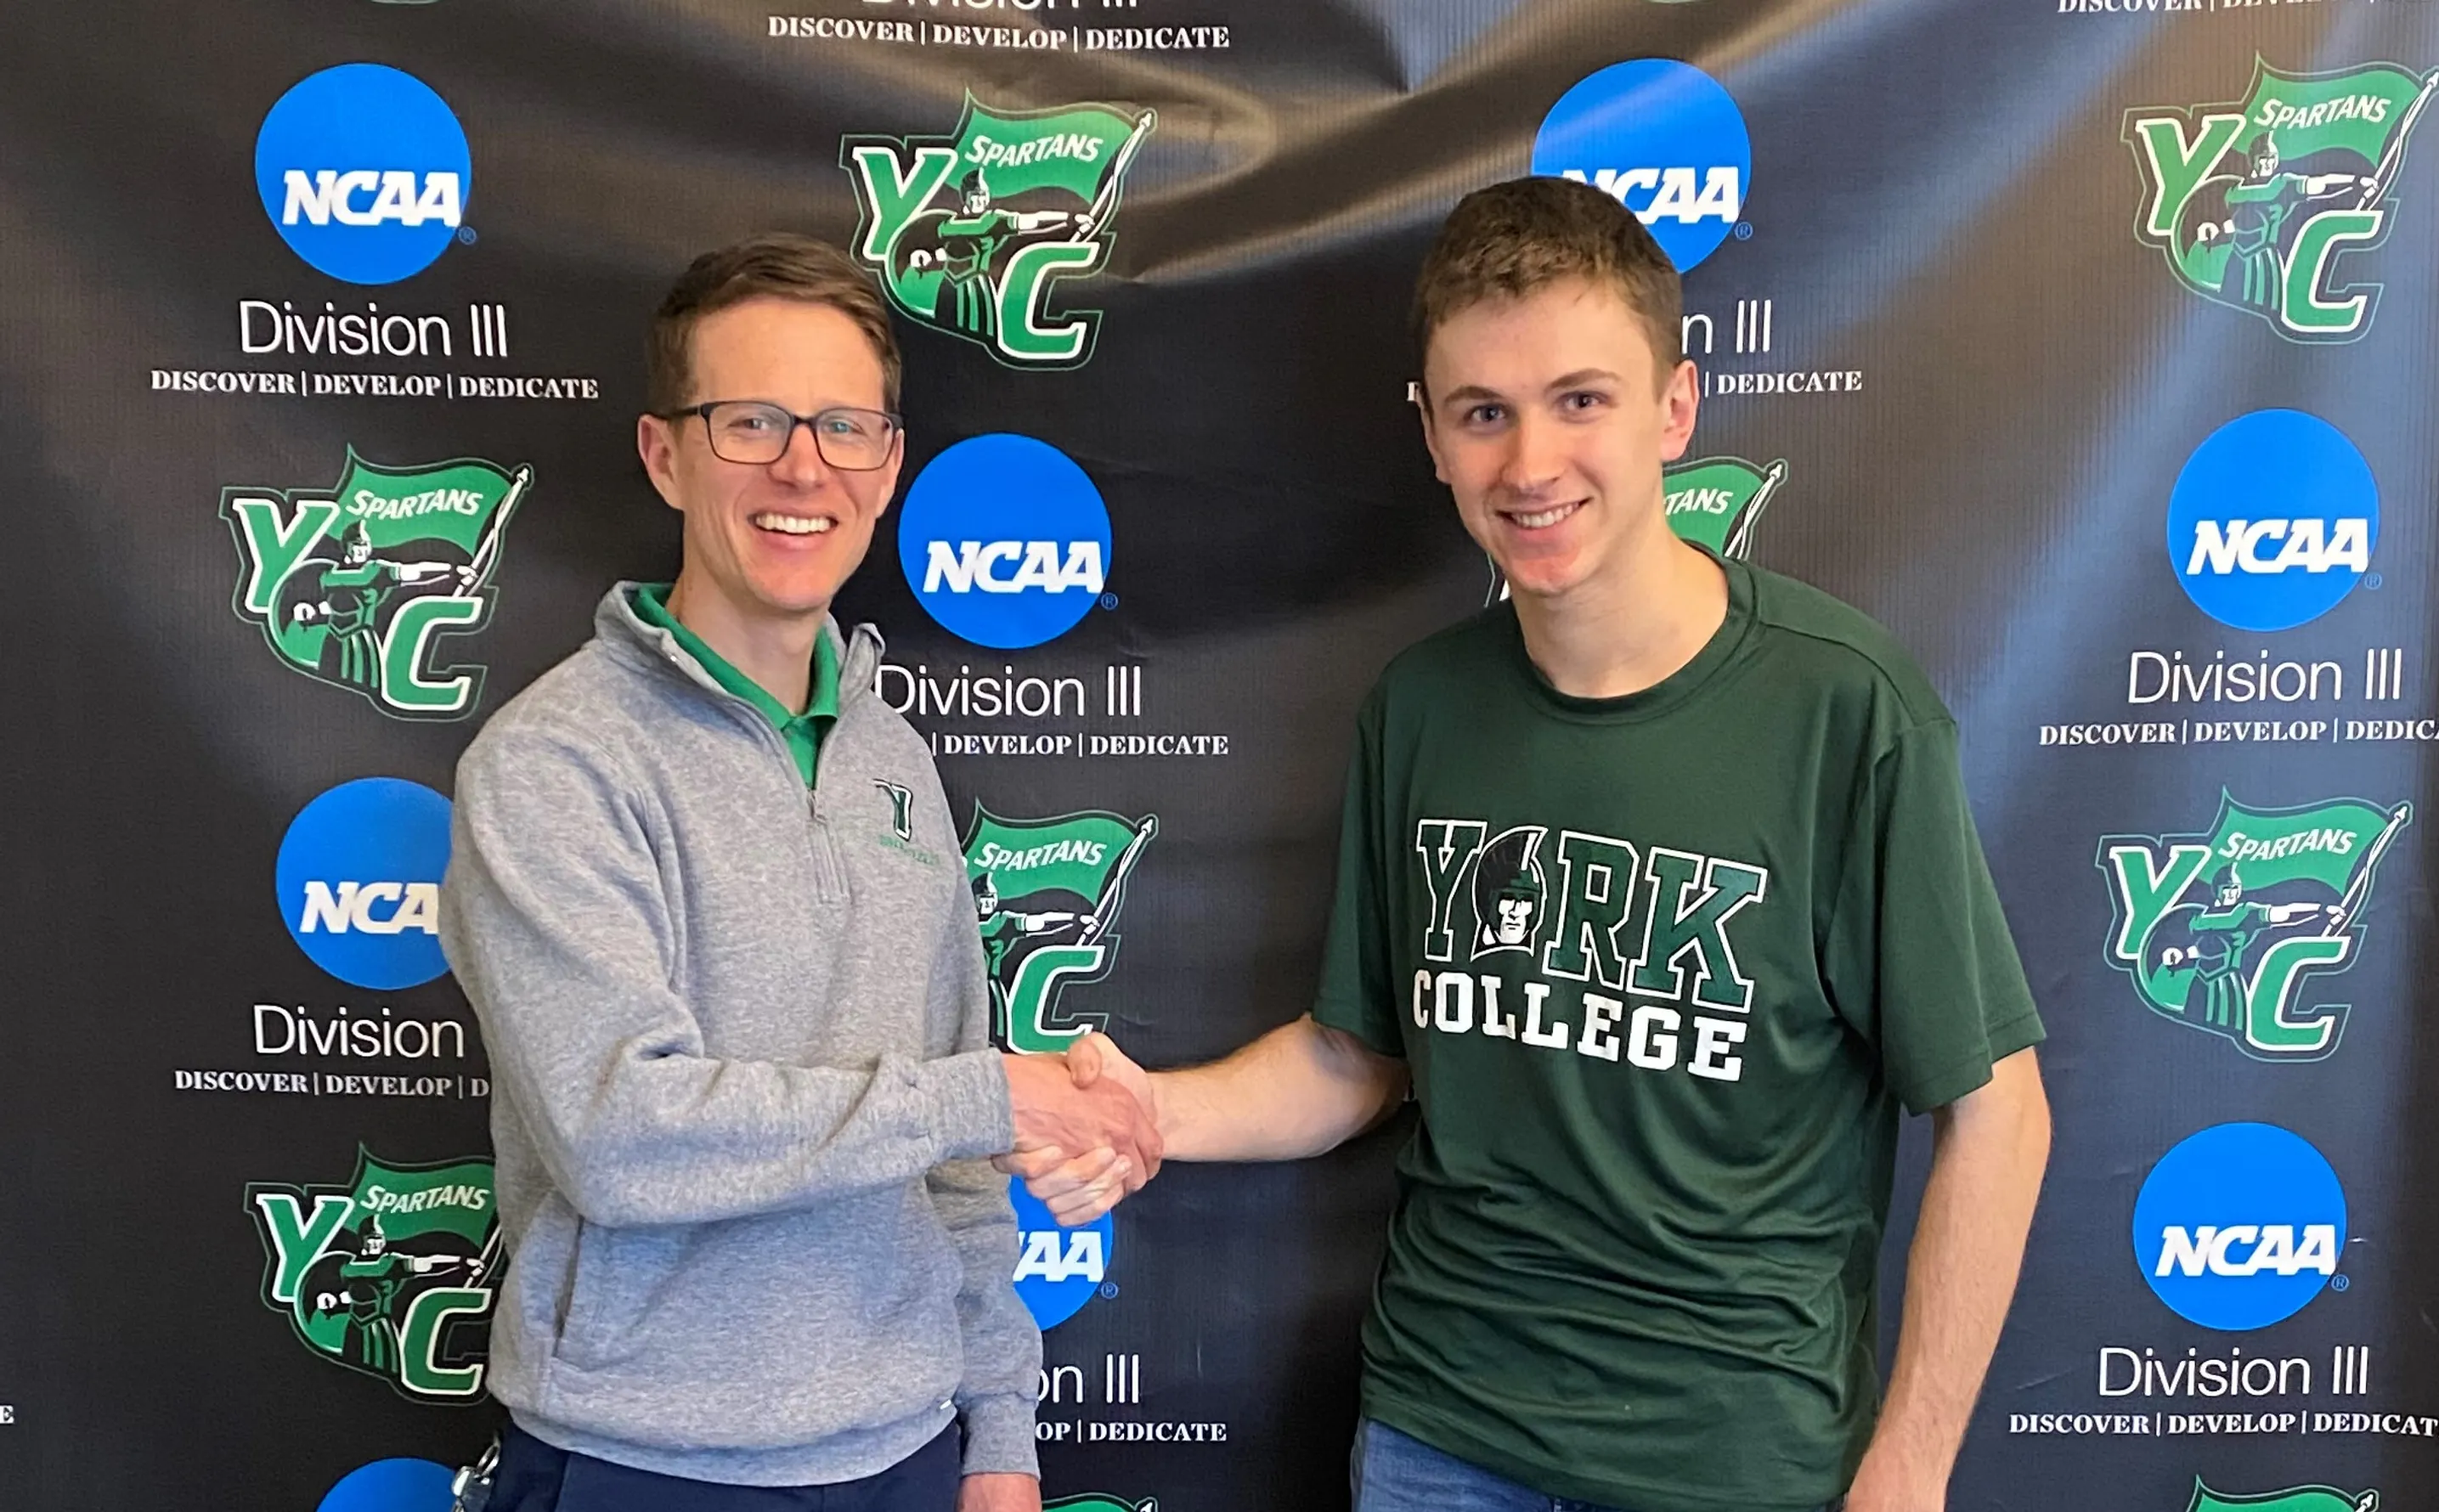 Student shakes hands with his future coach. They are standing in front of a branded York College backdrop.